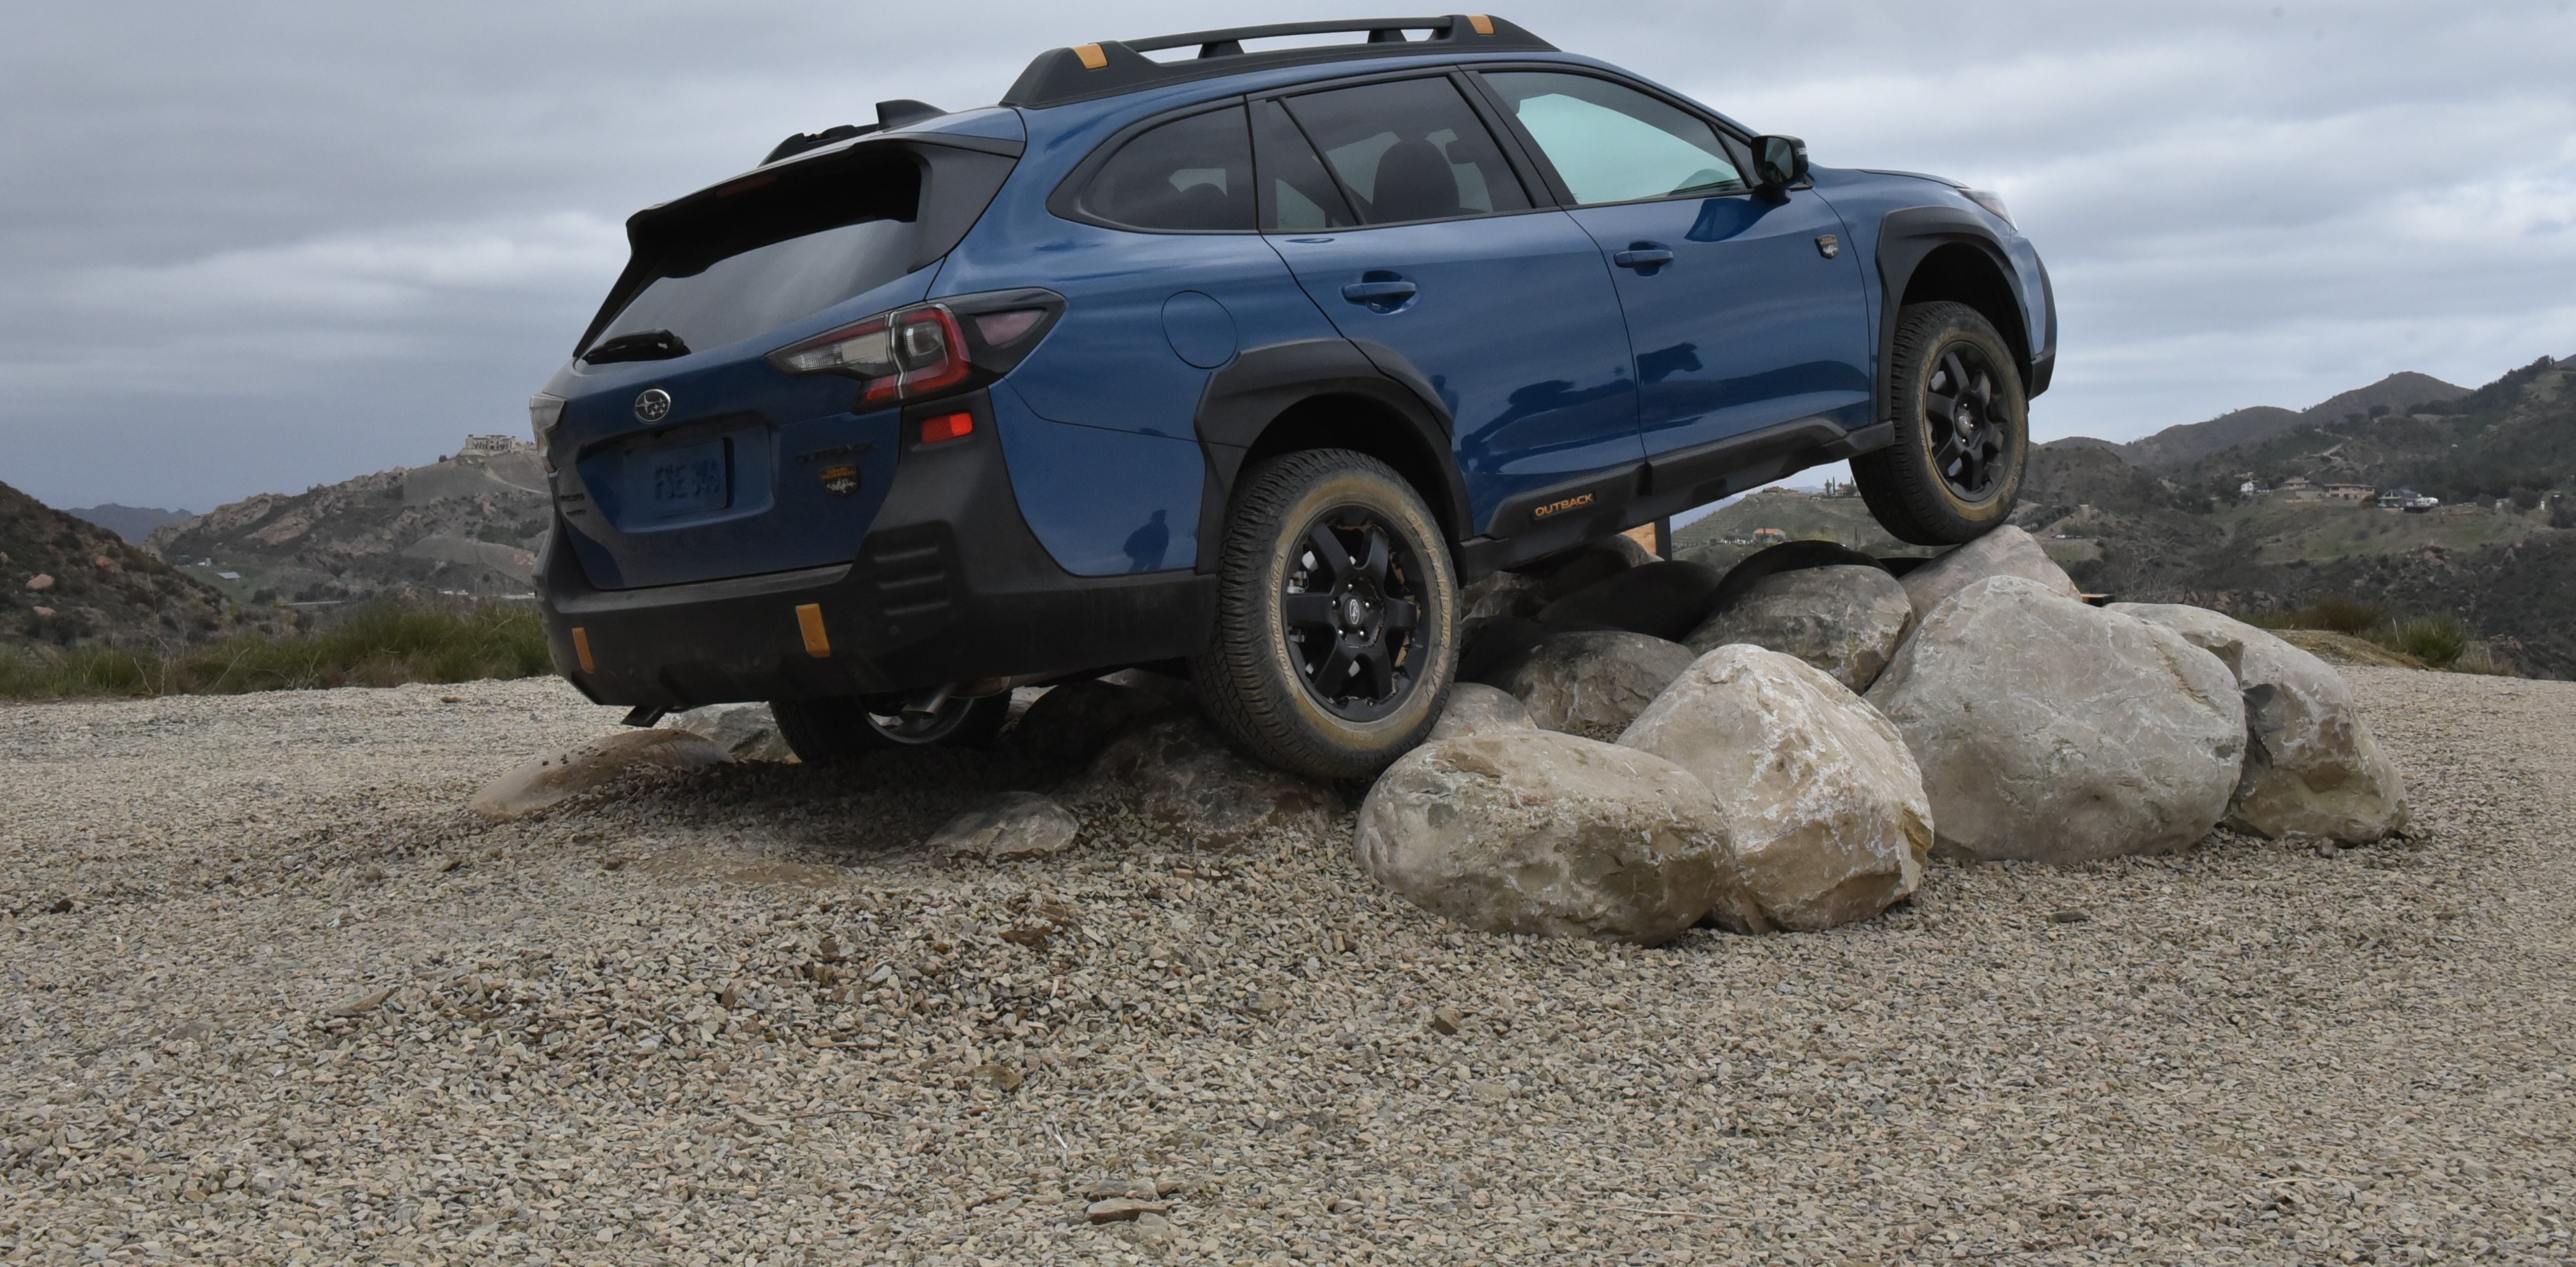 ’22 Subaru Outback Wilderness Gets Factory Overlanding Treatment